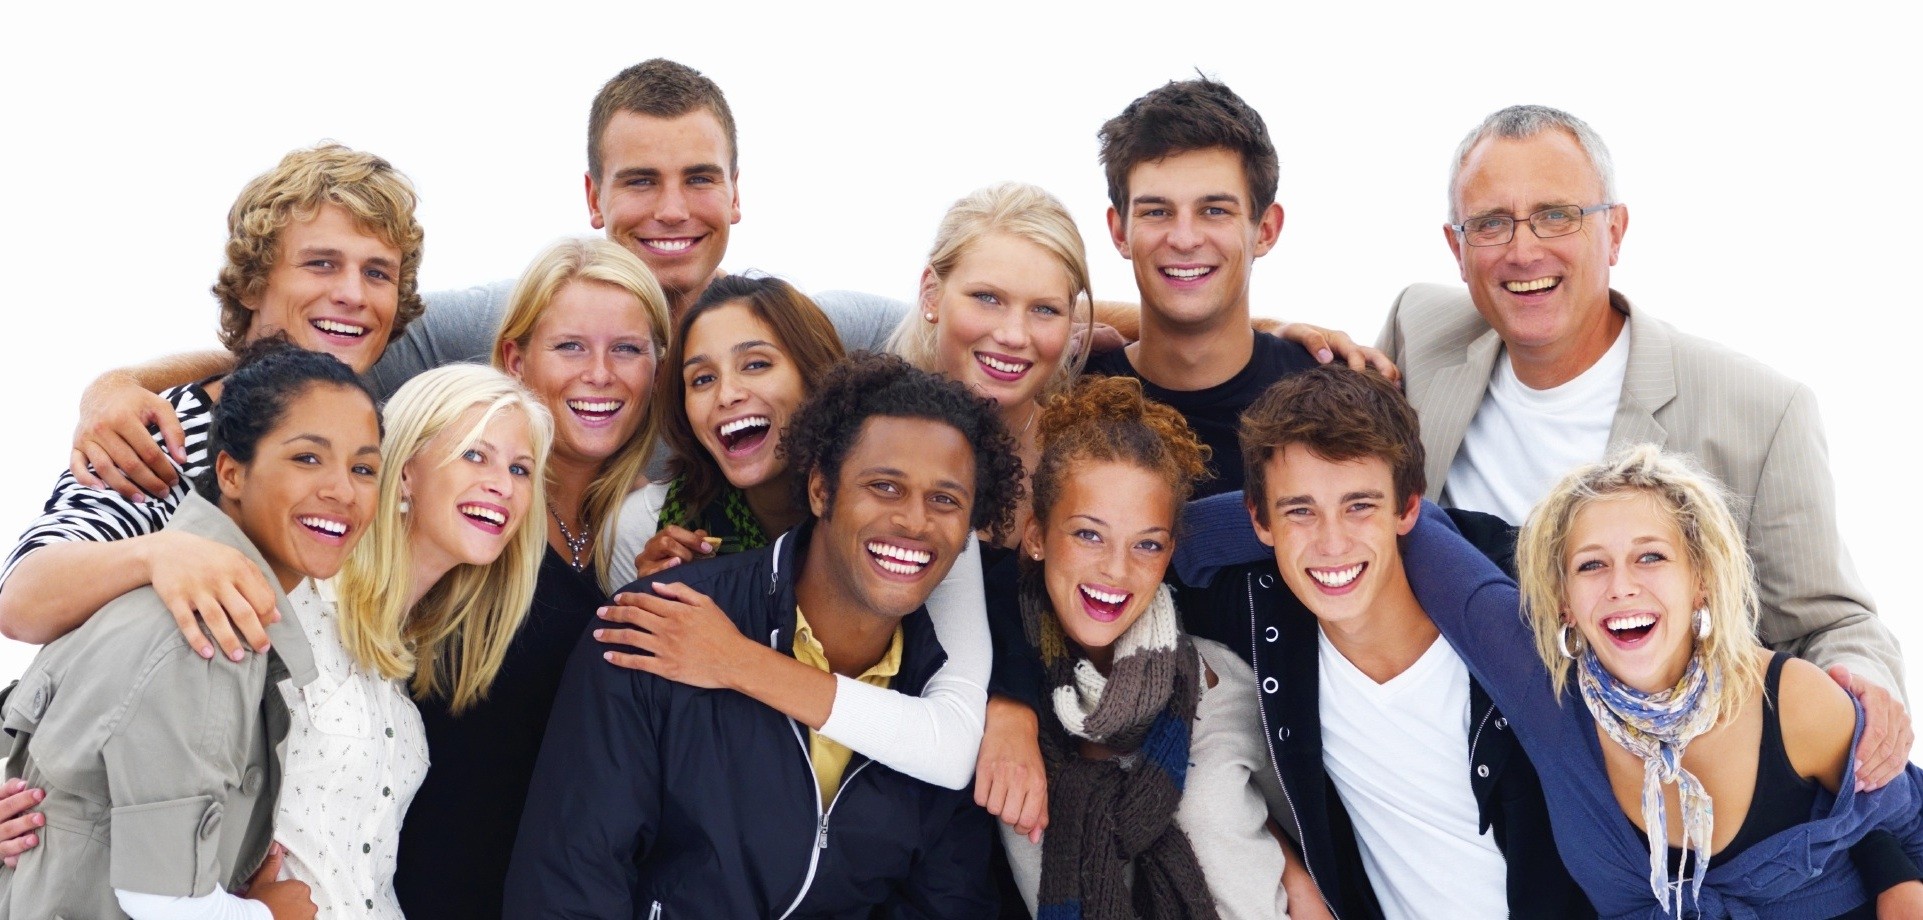 Group Of Smiling Friends Against White Background Faith Church